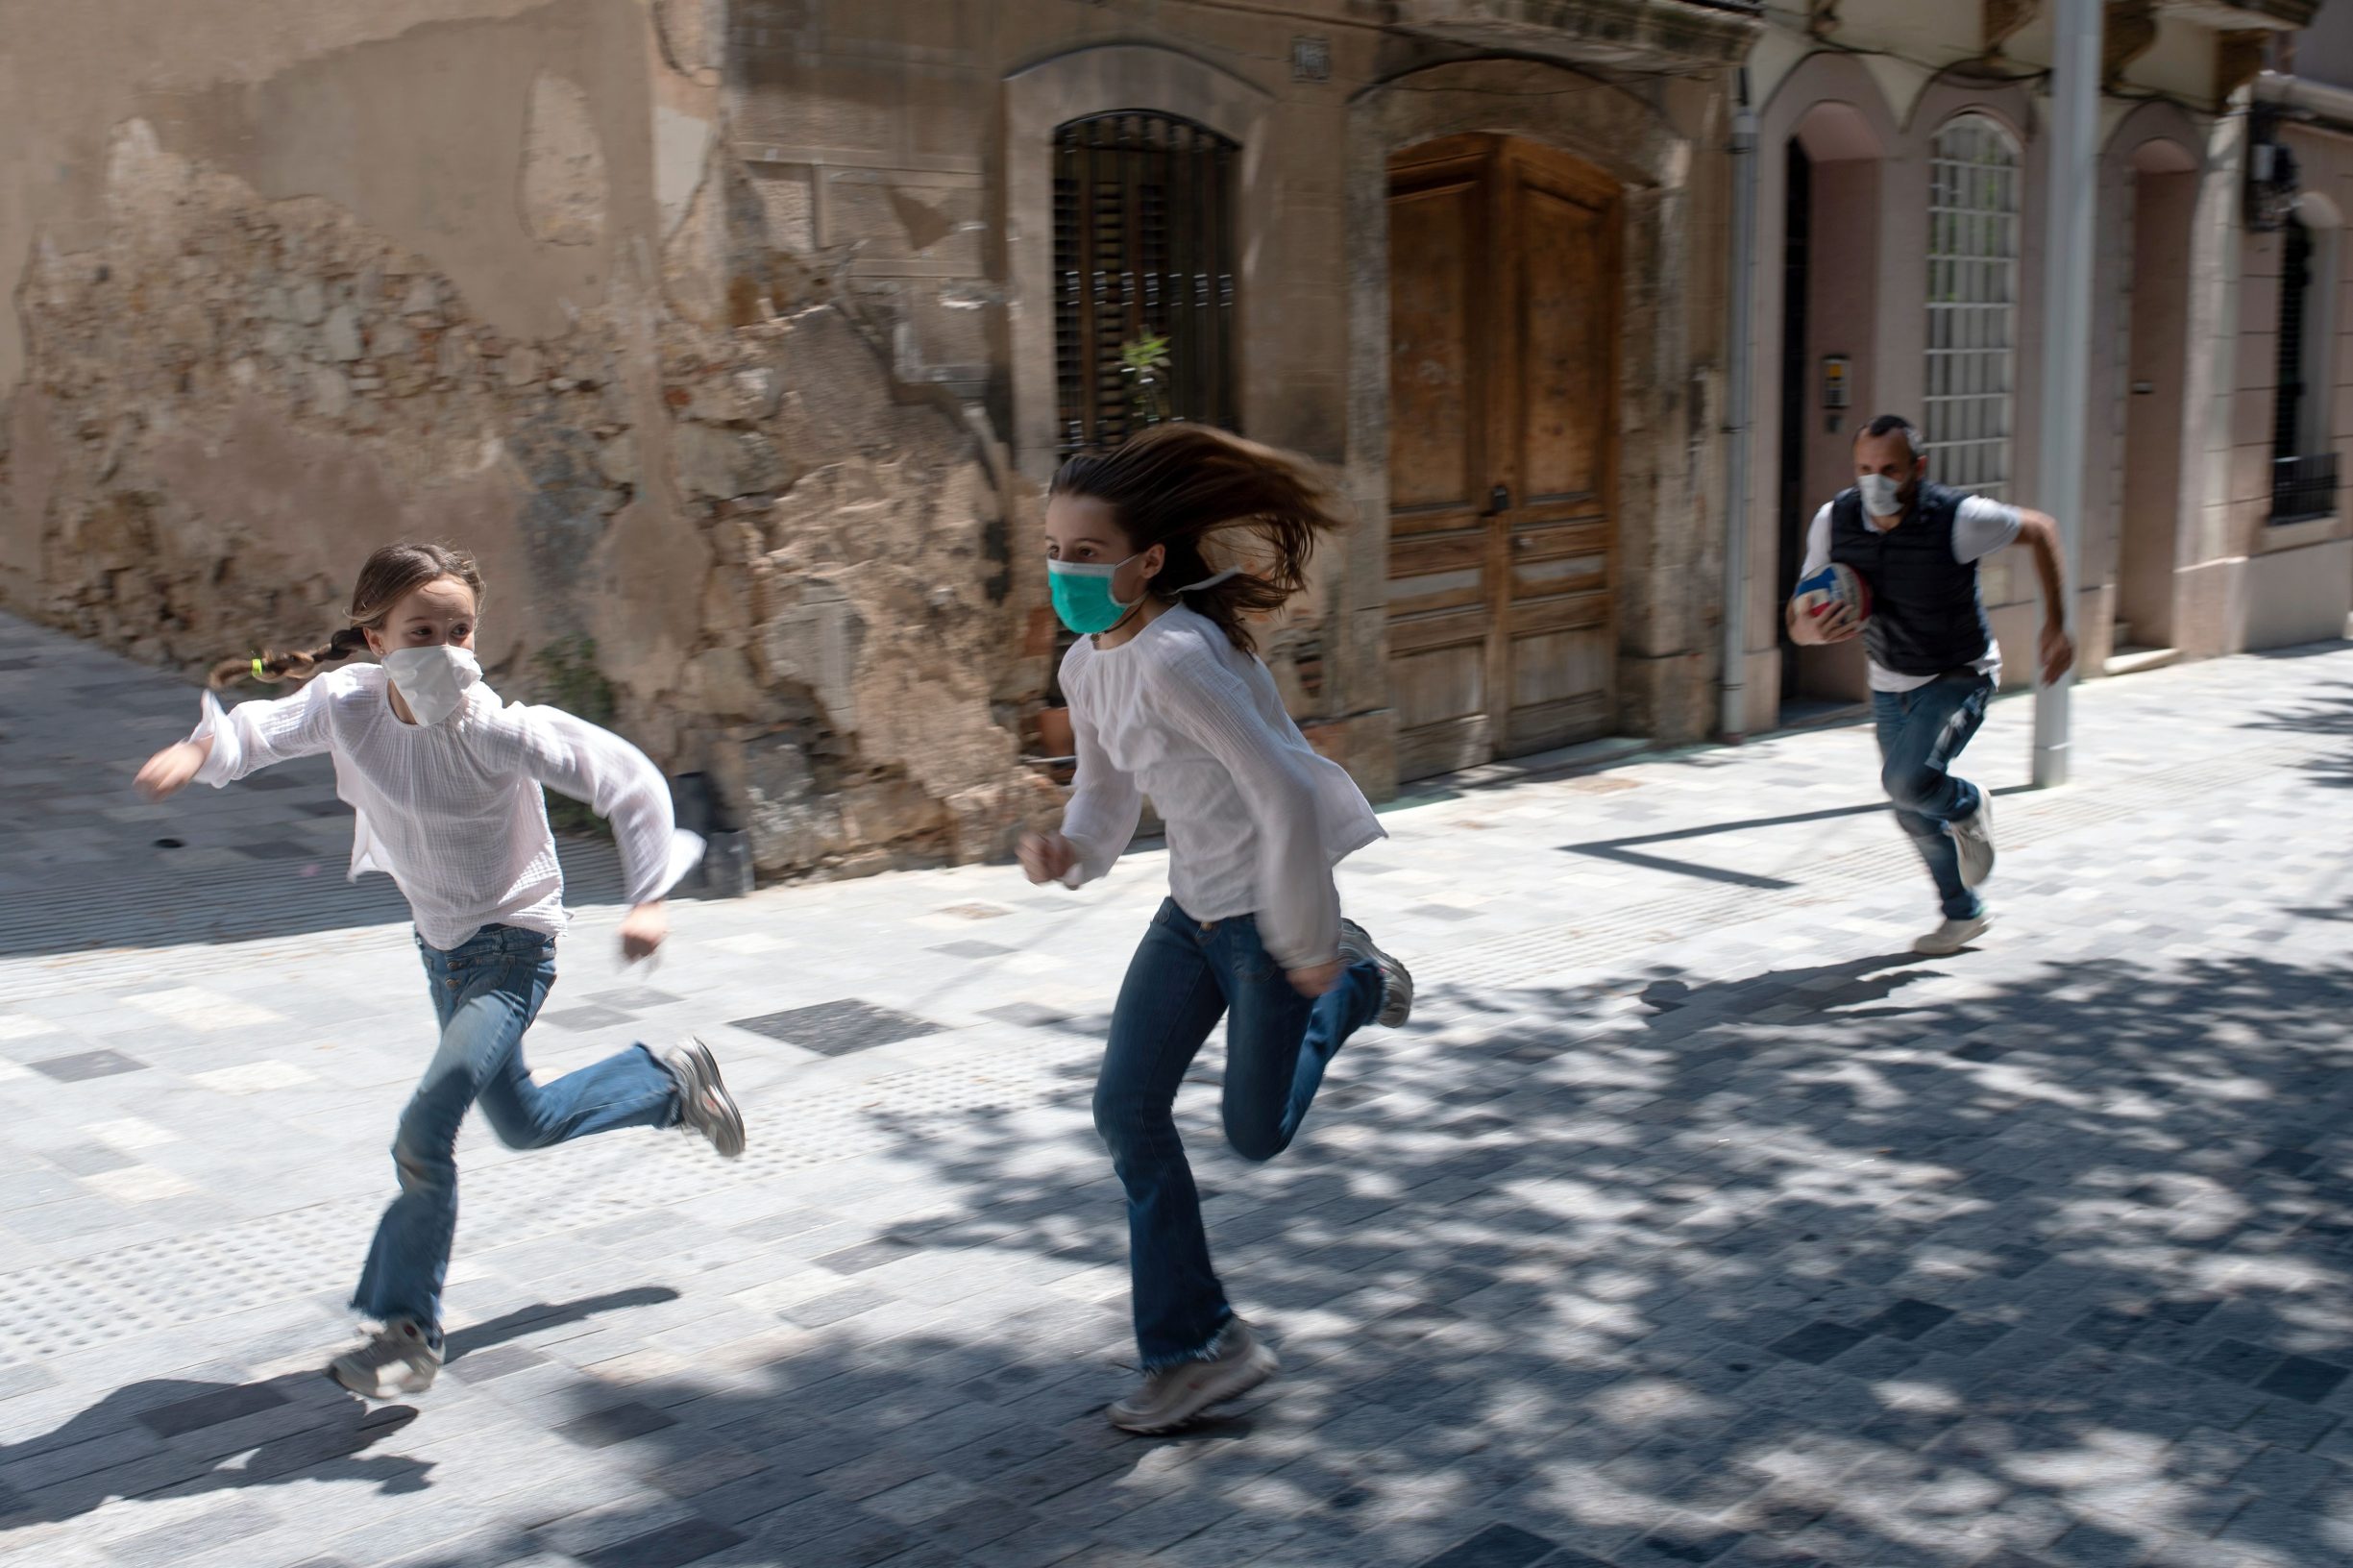 TOPSHOT - Joan, 45, chases his daughters Ines, 11, and Mar, 9, as they play in the street on April 26, 2020, in Barcelona, during a national lockdown to prevent the spread of the COVID-19 disease. - After six weeks stuck at home, Spain's children were being allowed out today to run, play or go for a walk as the government eased one of the world's toughest coronavirus lockdowns. Spain is one of the hardest hit countries, with a death toll running a more than 23,000 to put it behind only the United States and Italy despite stringent restrictions imposed from March 14, including keeping all children indoors. Today, with their scooters, tricycles or in prams, the children accompanied by their parents came out onto largely deserted streets. (Photo by Josep LAGO / AFP)